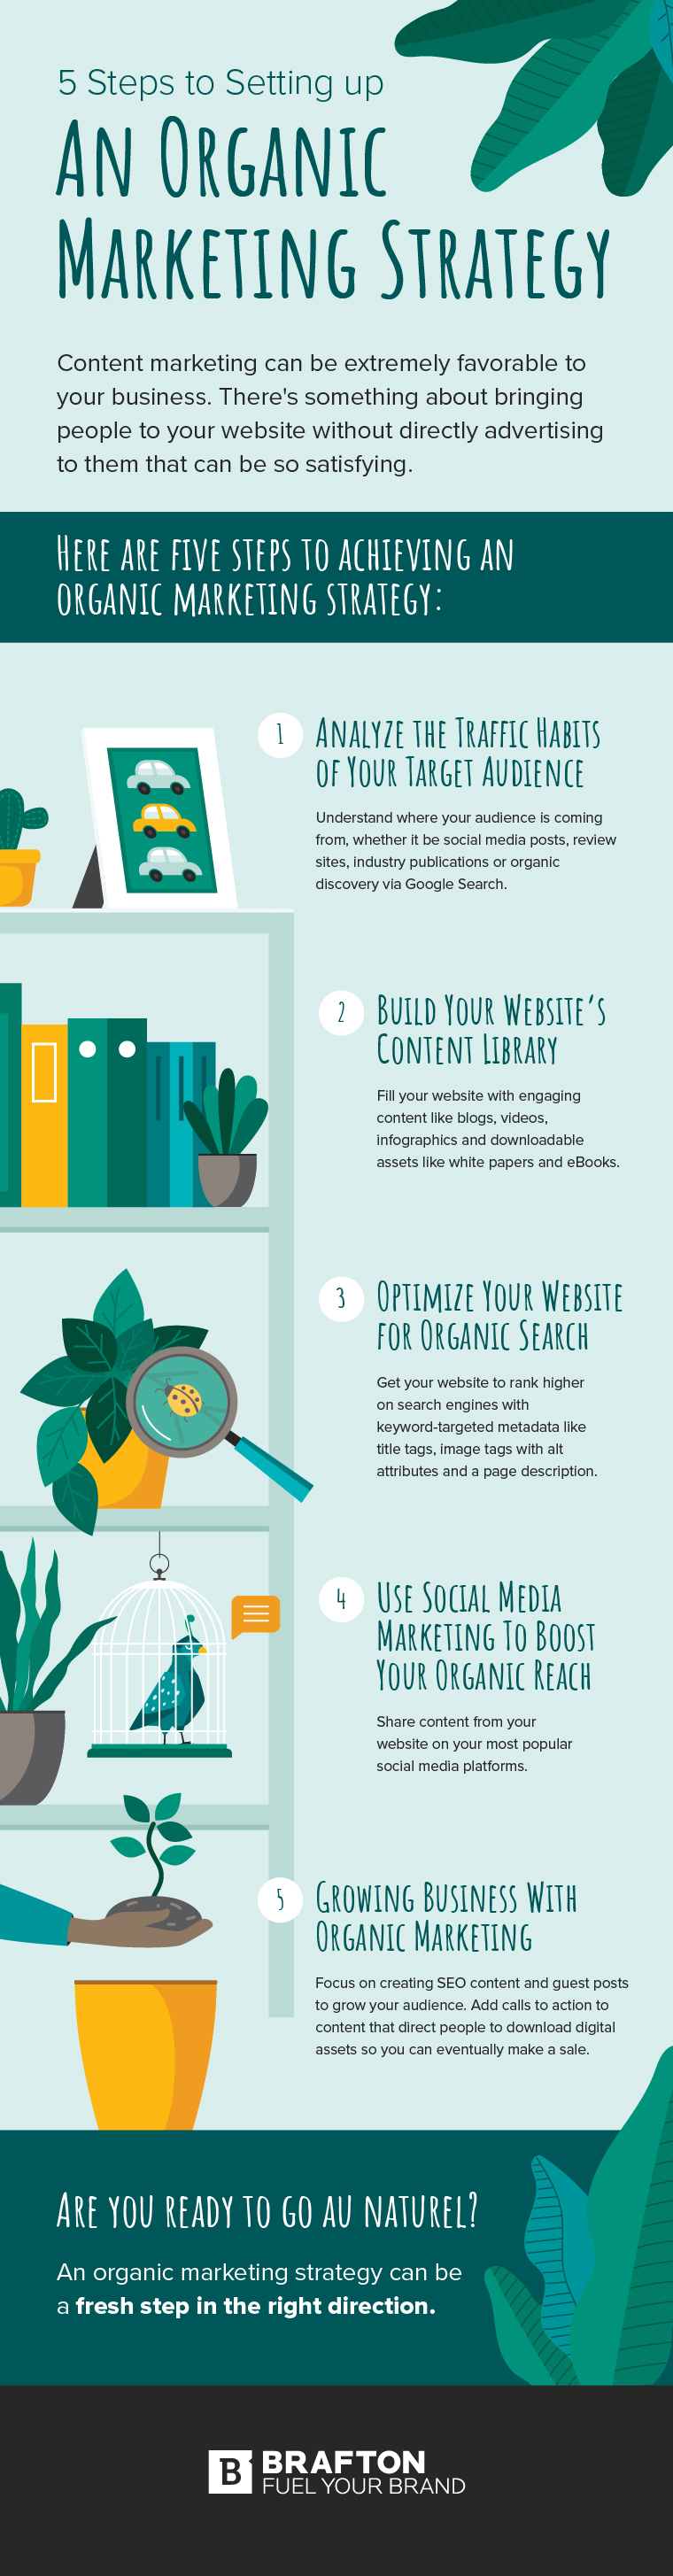 5 steps to setting up an organic marketing strategy infographic